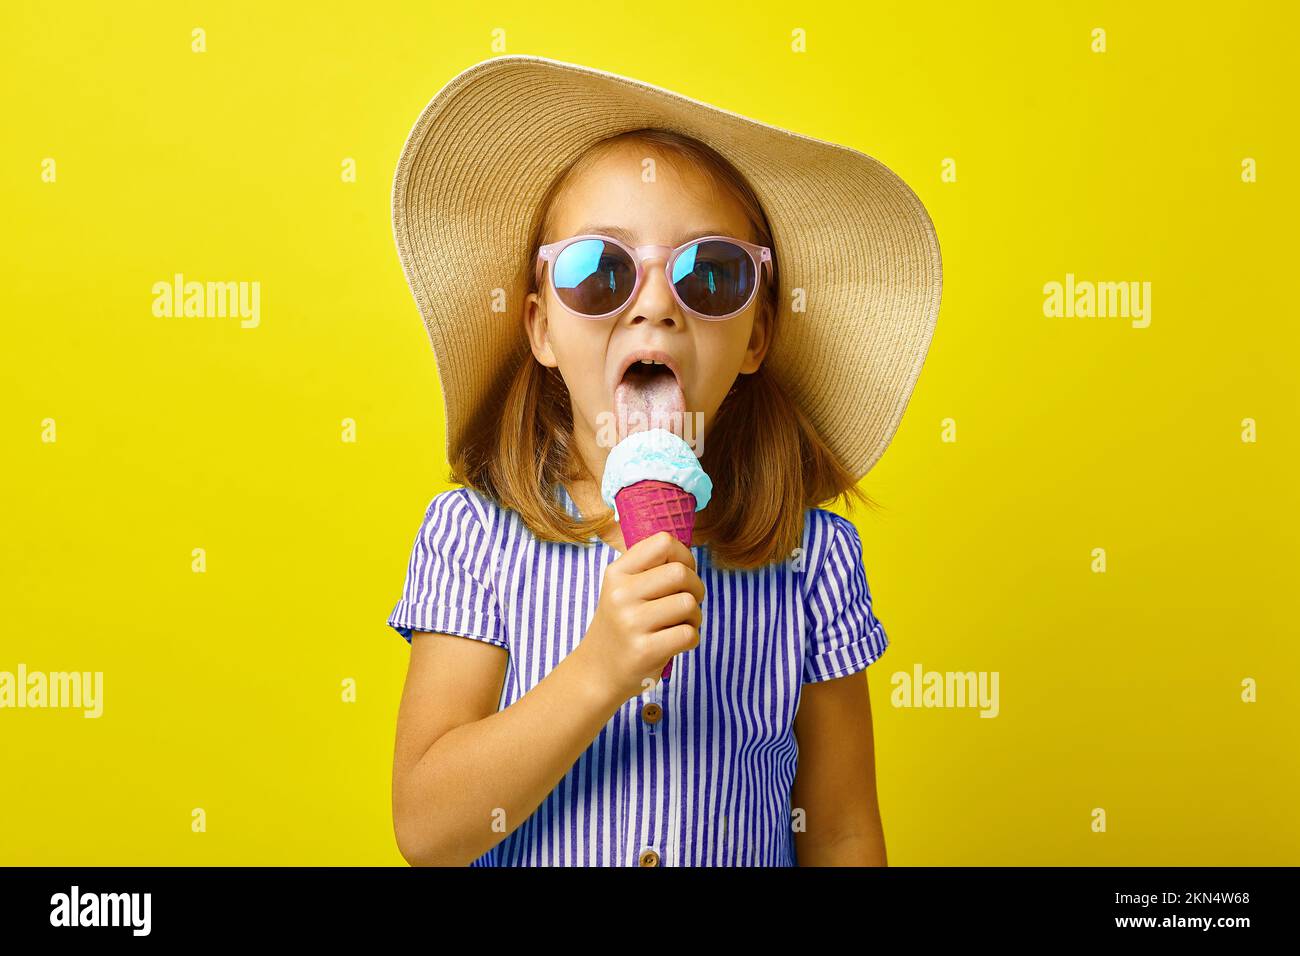 Funny little girl in summer clothes eating beautiful ice cream, standing on yellow isolated background. Stock Photo